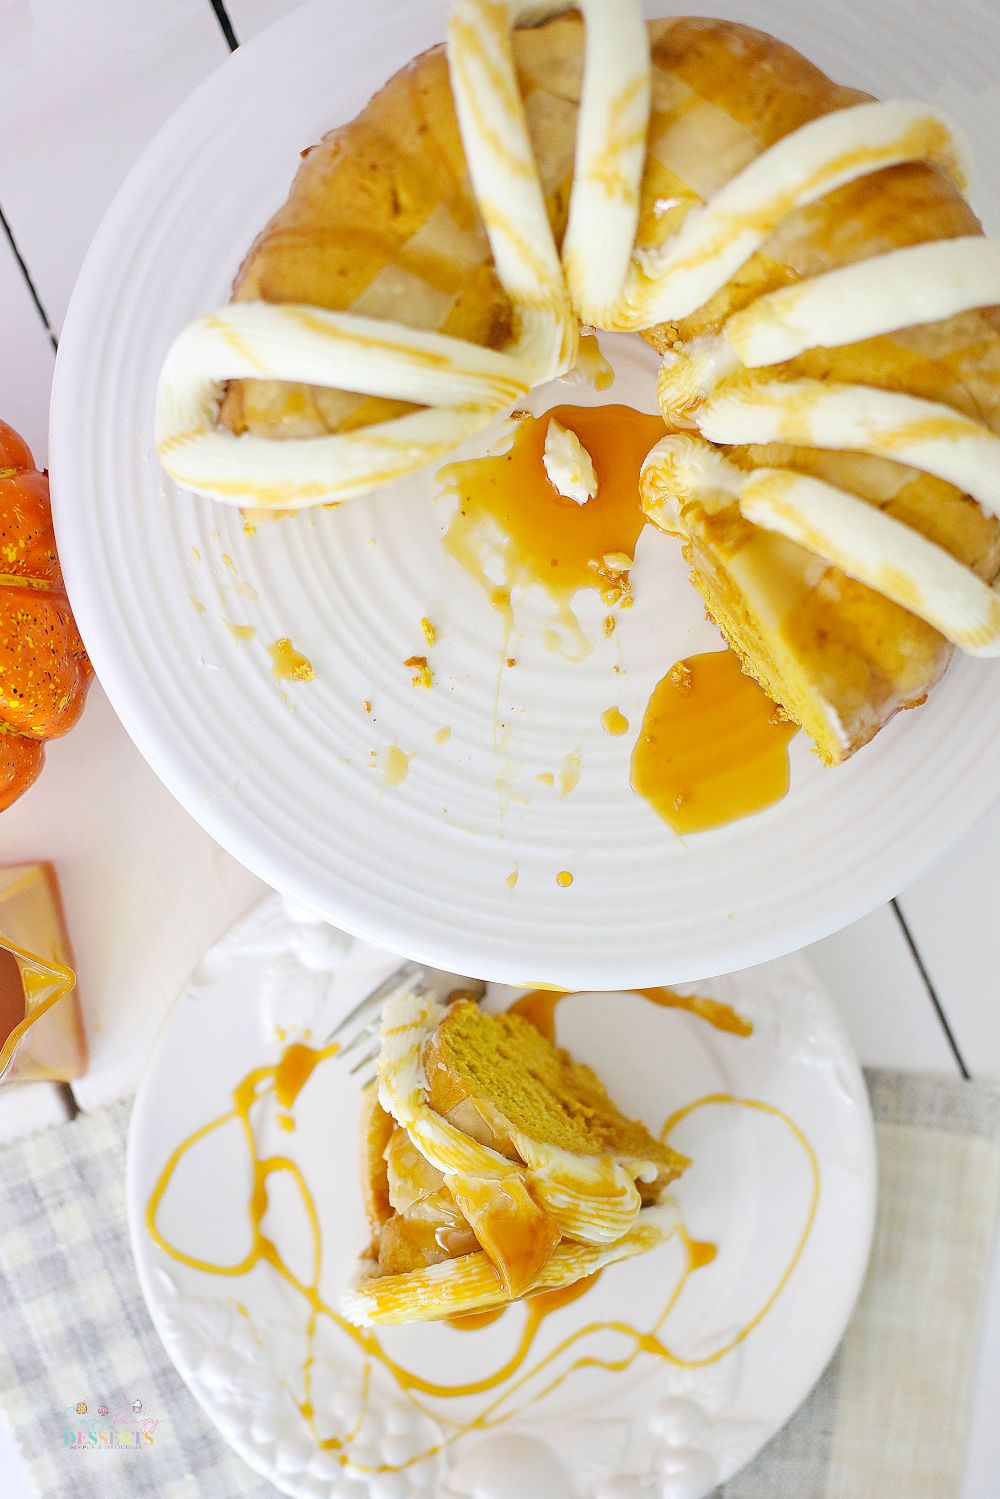 Image of fall bundt cake made with fresh pumpkin, topped with buttercream frosting and drizzled with caramel sauce